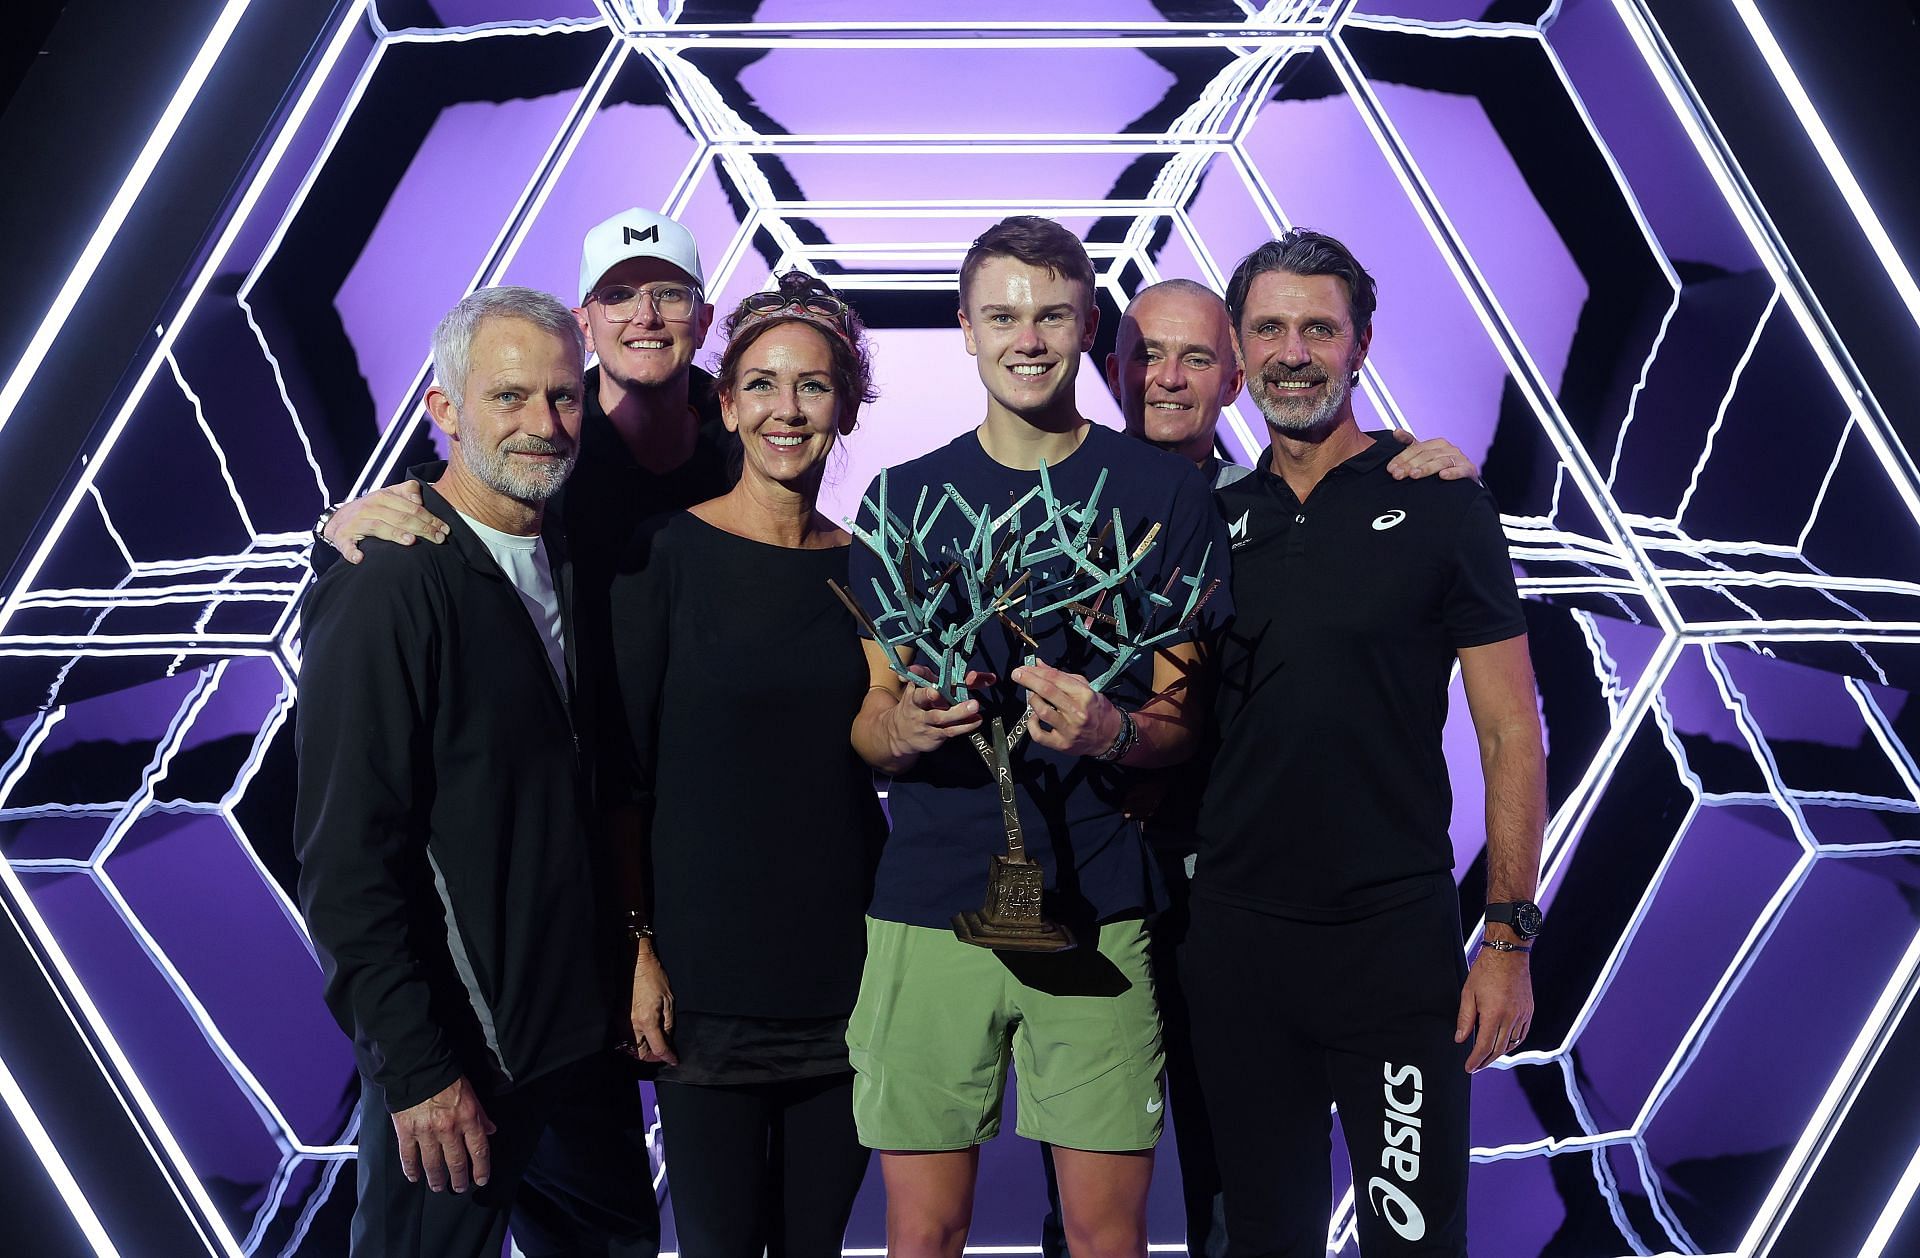 Holger Rune poses with his team after clinching the Paris Masters